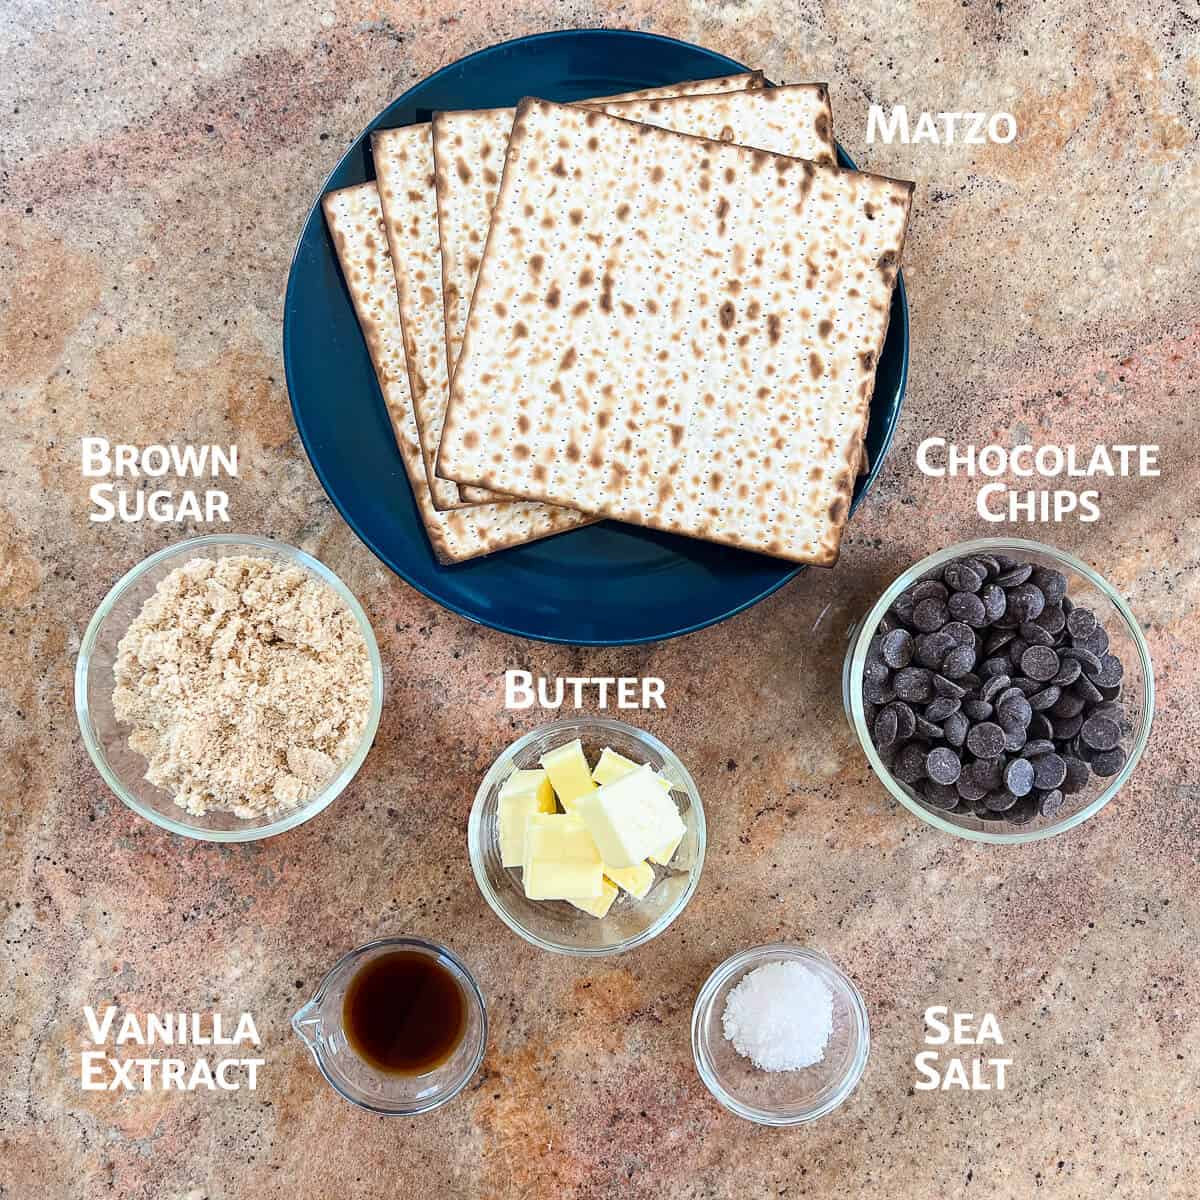 Matzo crack ingredients portioned into glass bowls with matzo on a blue plate from overhead.